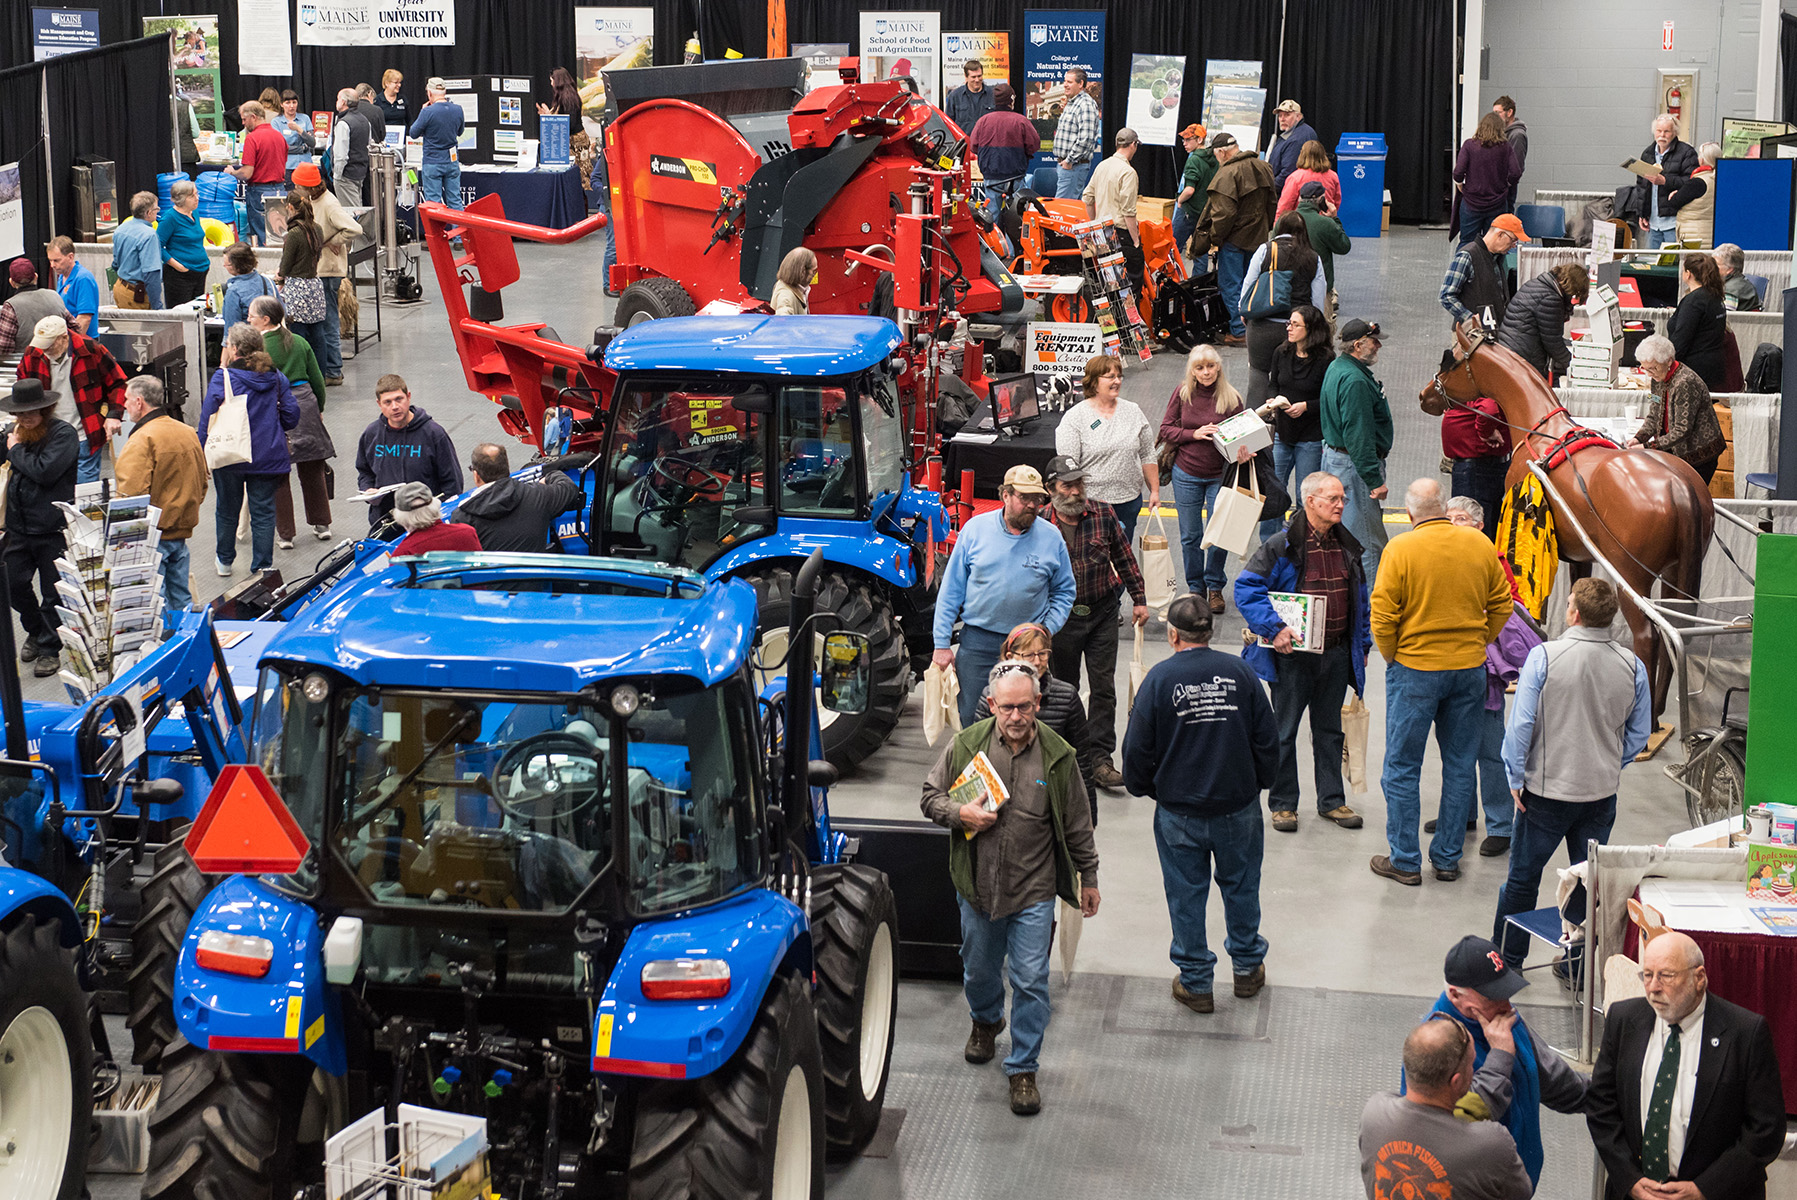 Save the date, 82nd Annual Maine Agricultural Trades Show Kicks Off